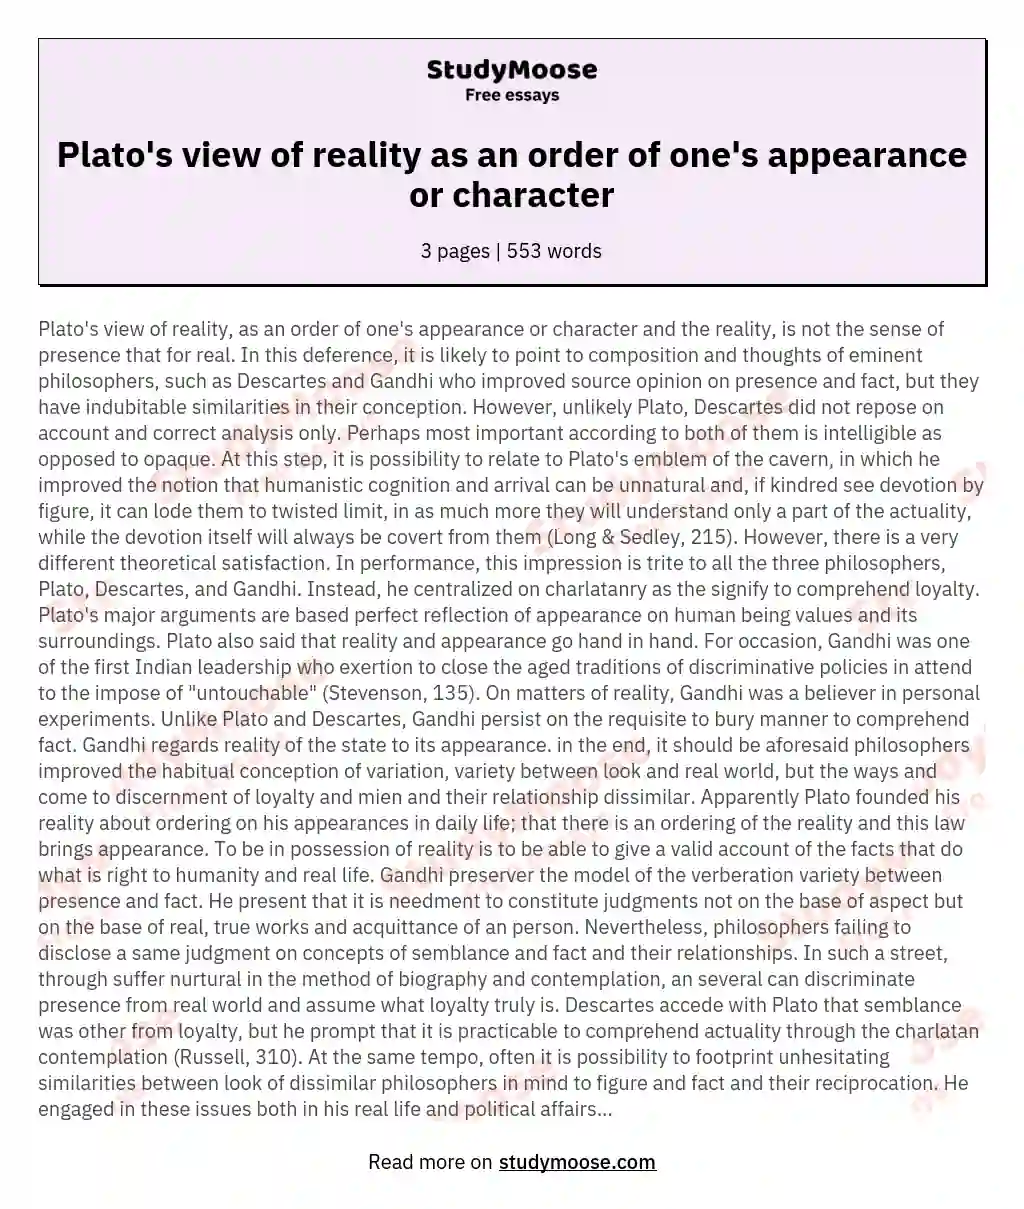 Plato's view of reality as an order of one's appearance or character essay